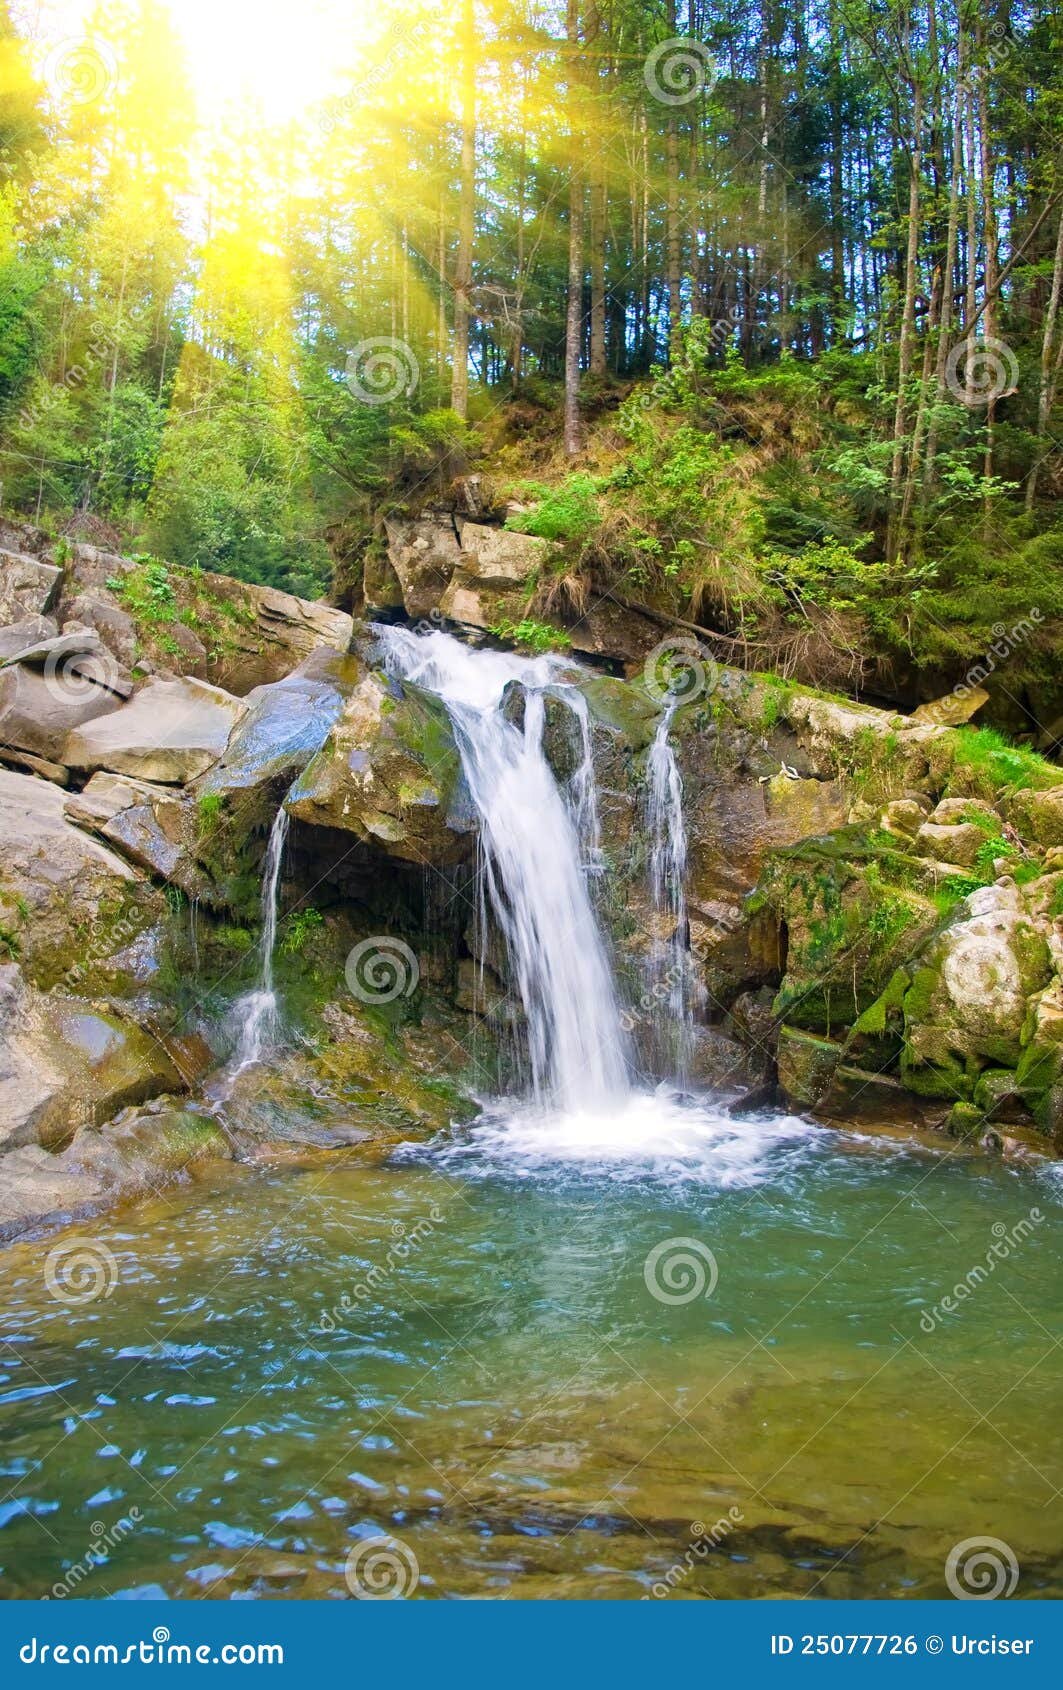 Waterfall On A Mountain River In The Spring Royalty Free Stock Image